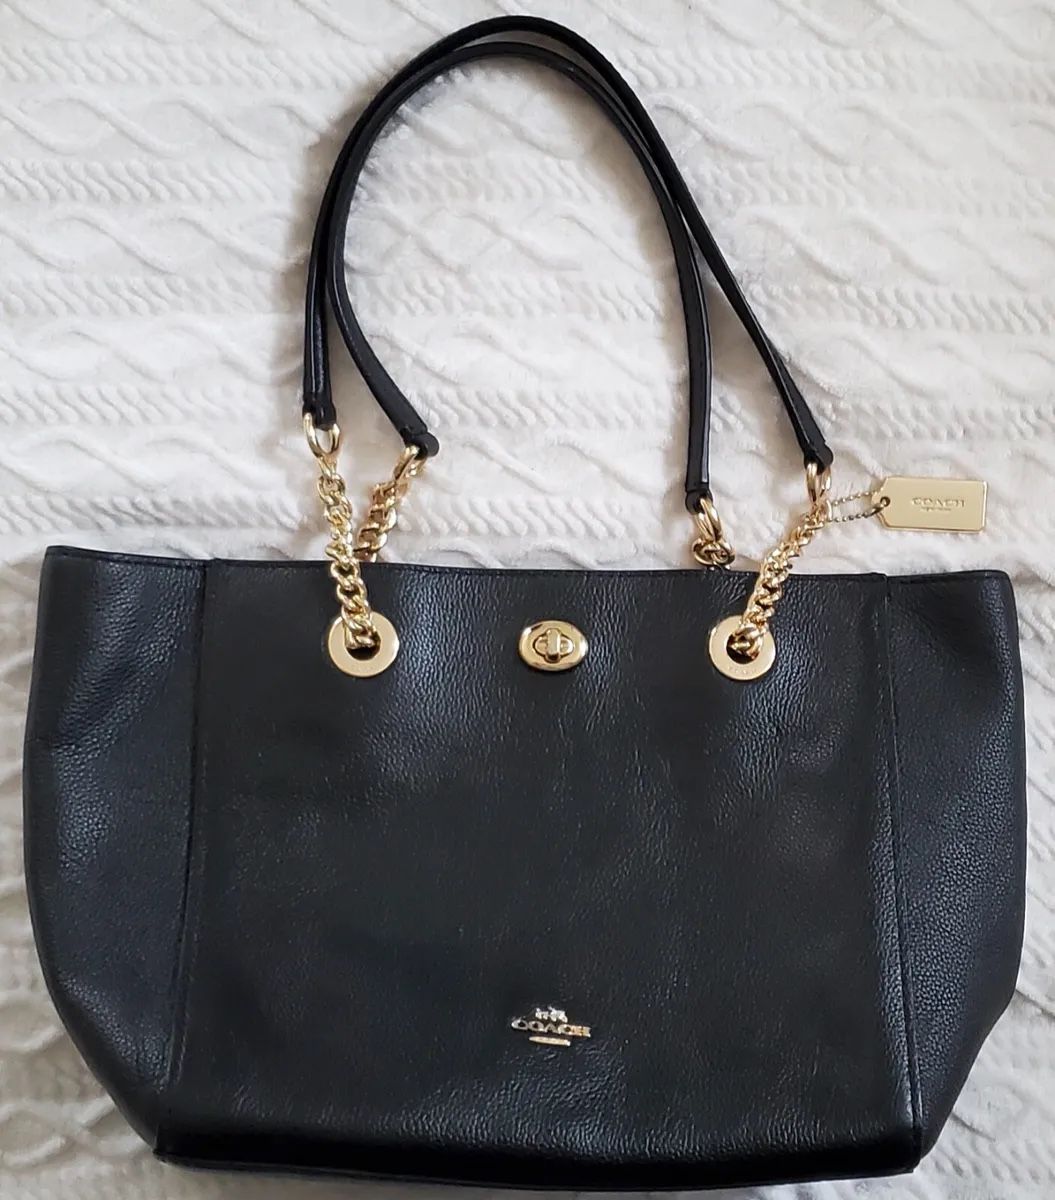 Small Coach Black Leather Tote Bag